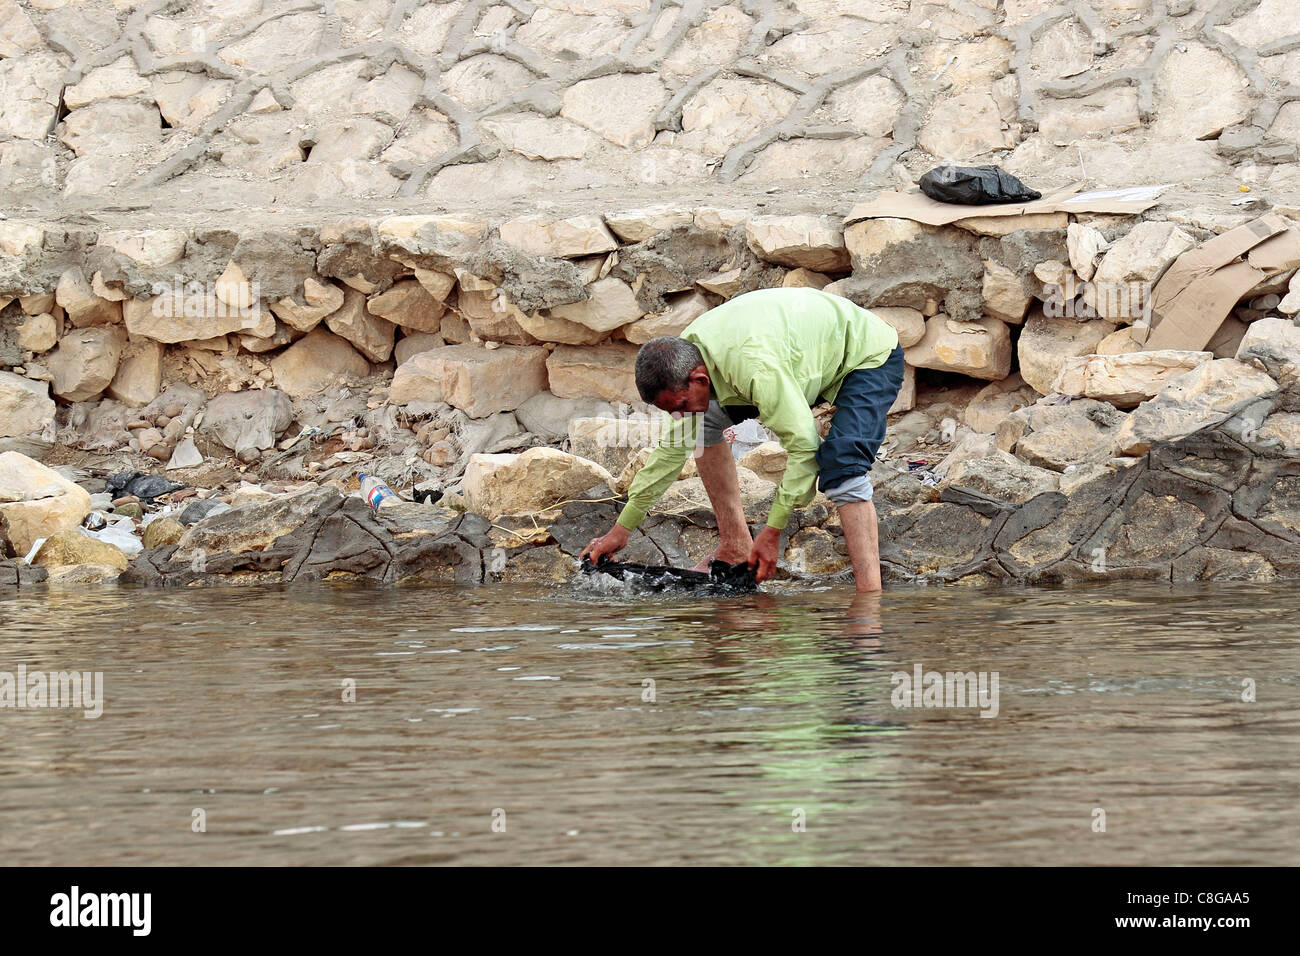 Man washing clothes on the bank of the River Nile in Cairo Stock Photo